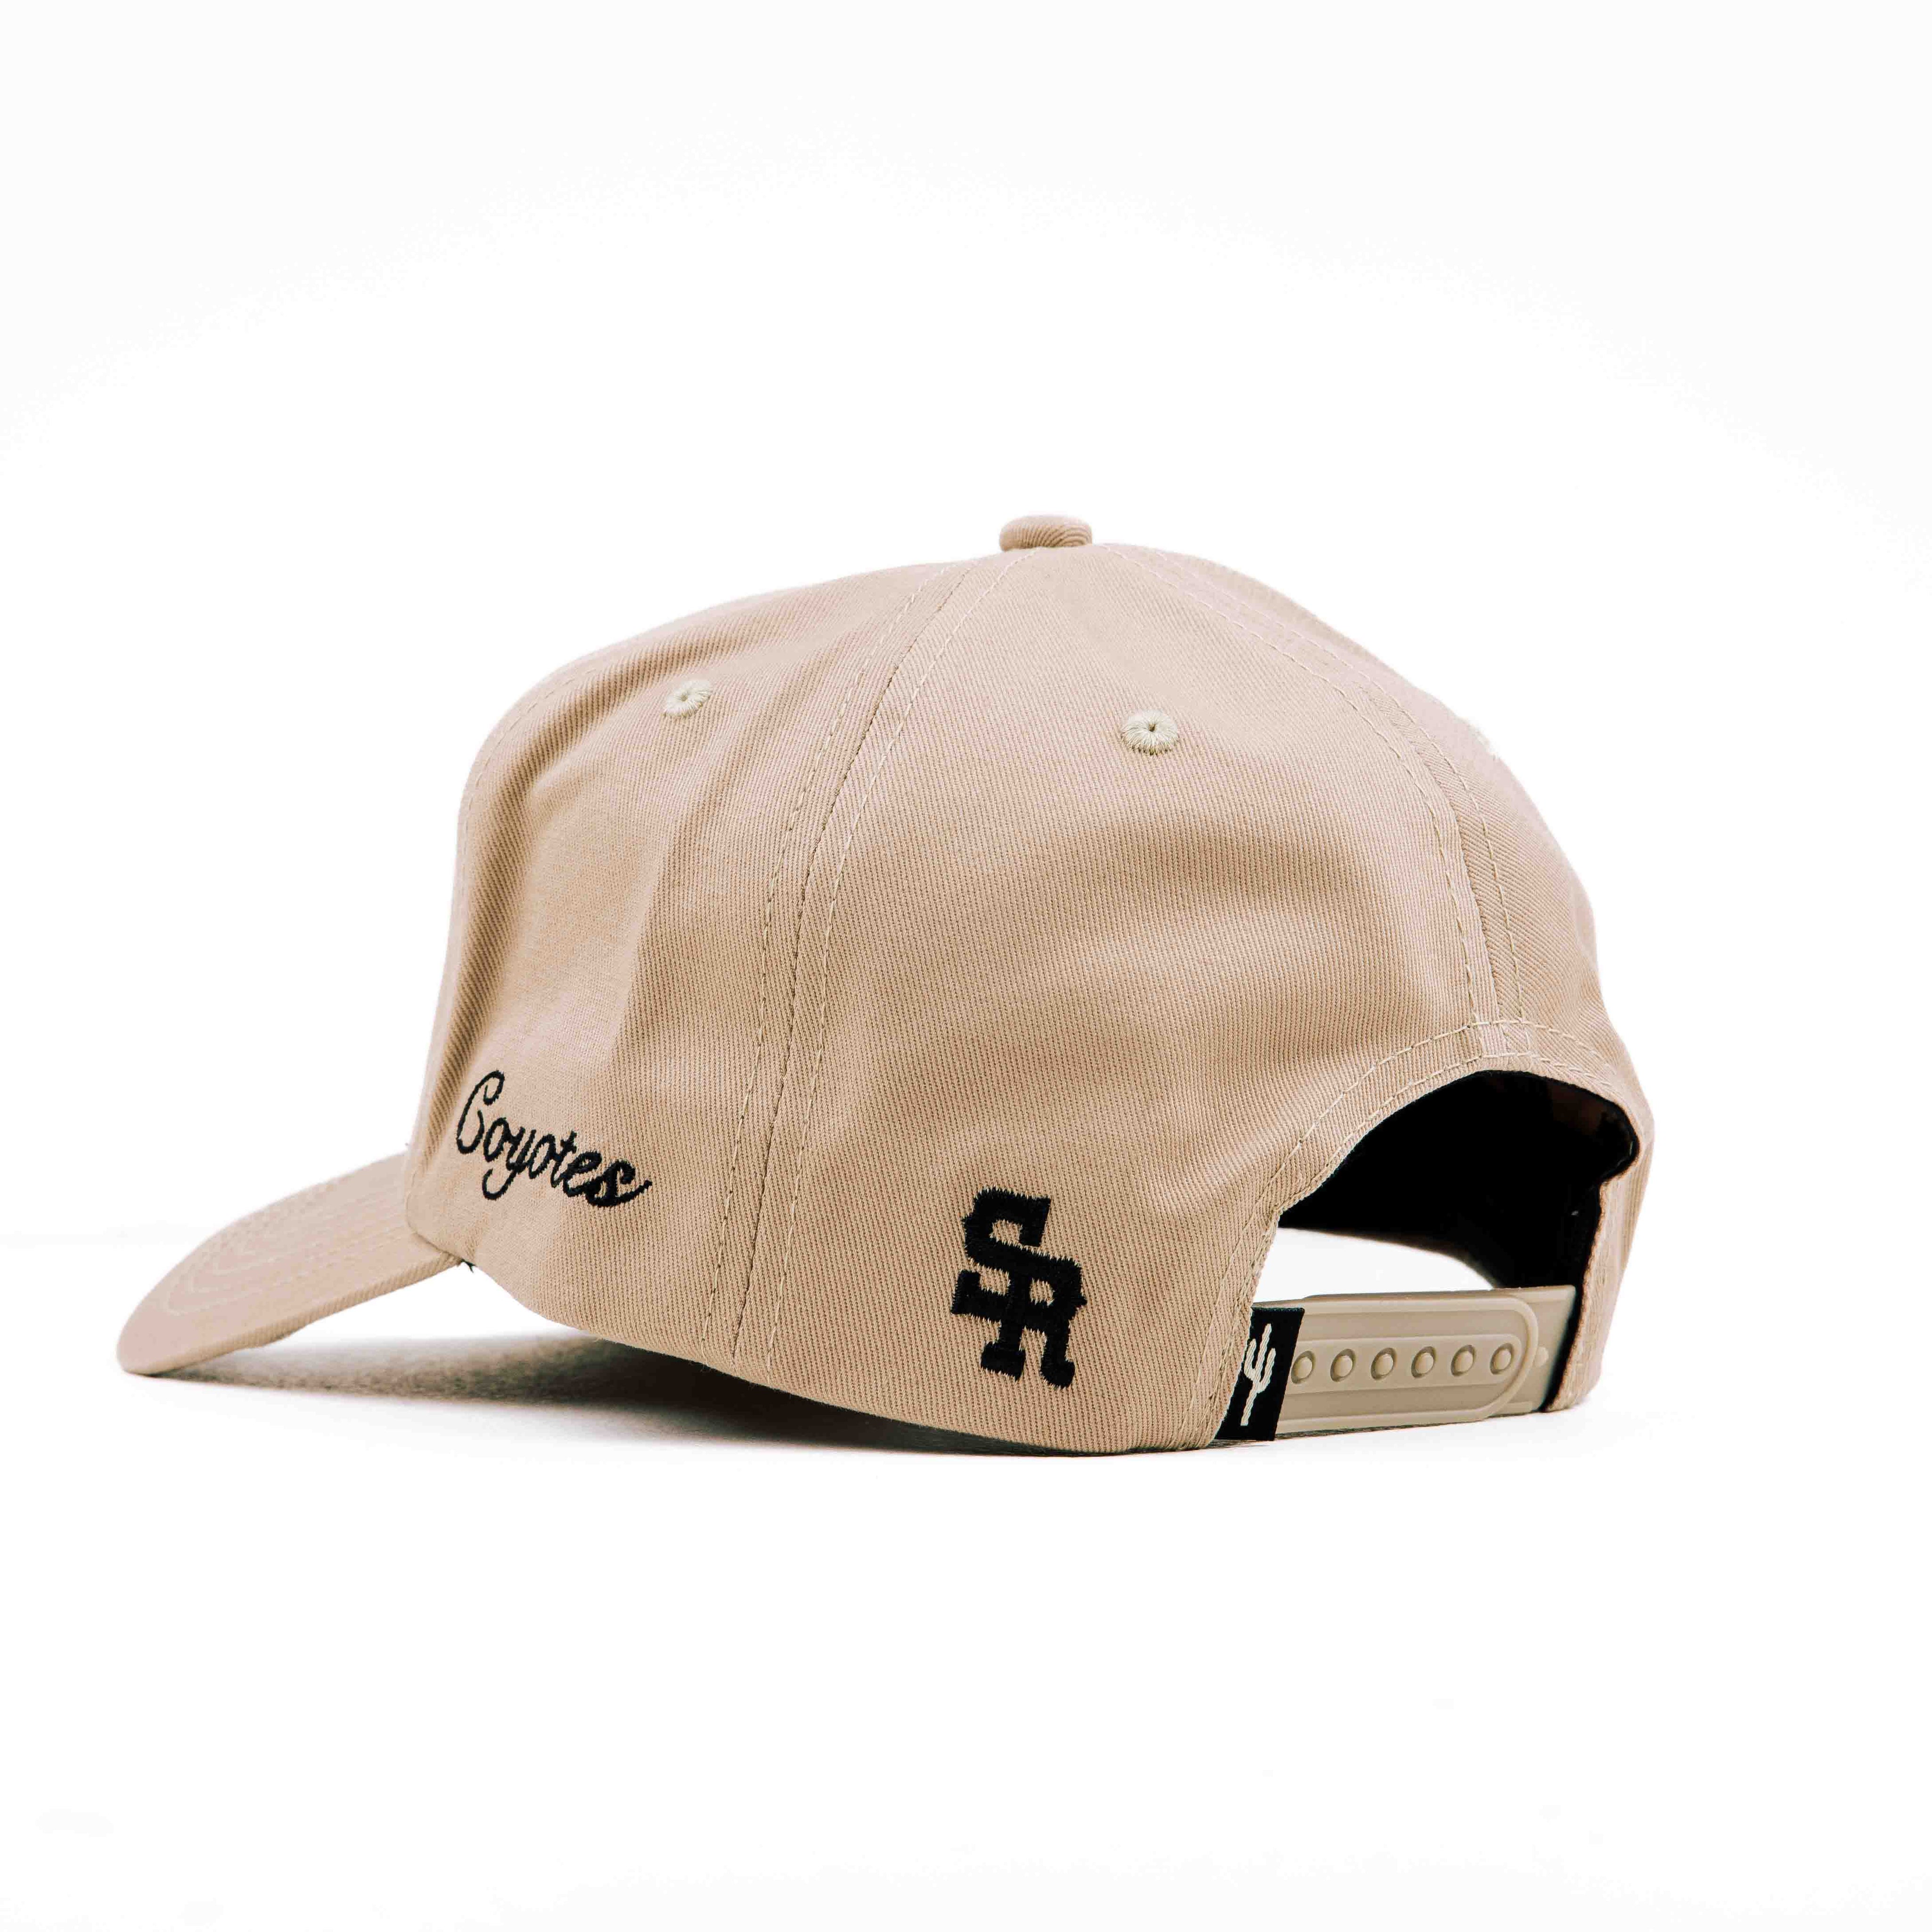 Stevenson Ranch x Coyotes Structured Hat Black Tan